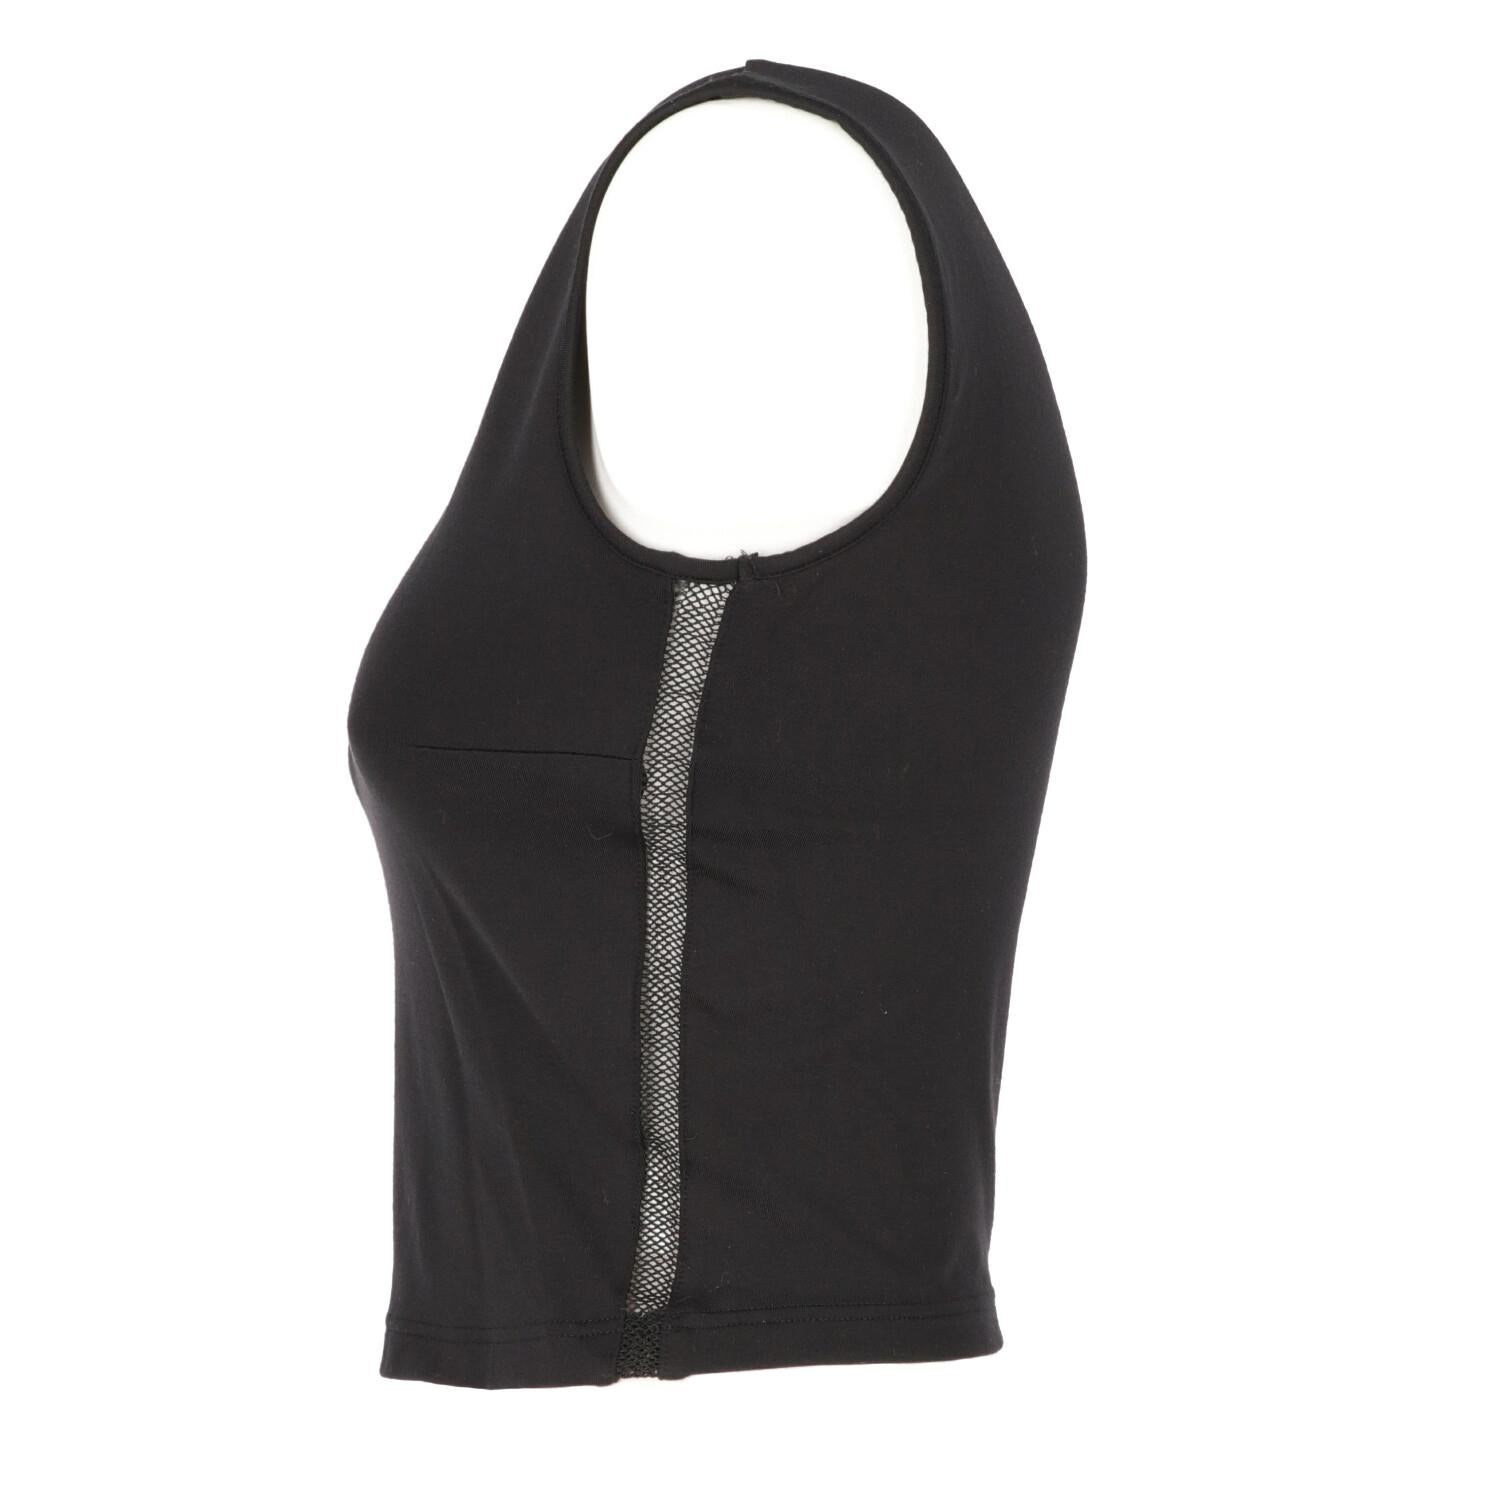 Versace Intensive sleeveless top in stretch fabric with thin mesh side bands.

The product has a little wear on the mesh as shown in the pictures.
Years: 90s

Made in Italy

Size: 42 IT

Flat measurements

Height: 40 cm
Bust: 37 cm